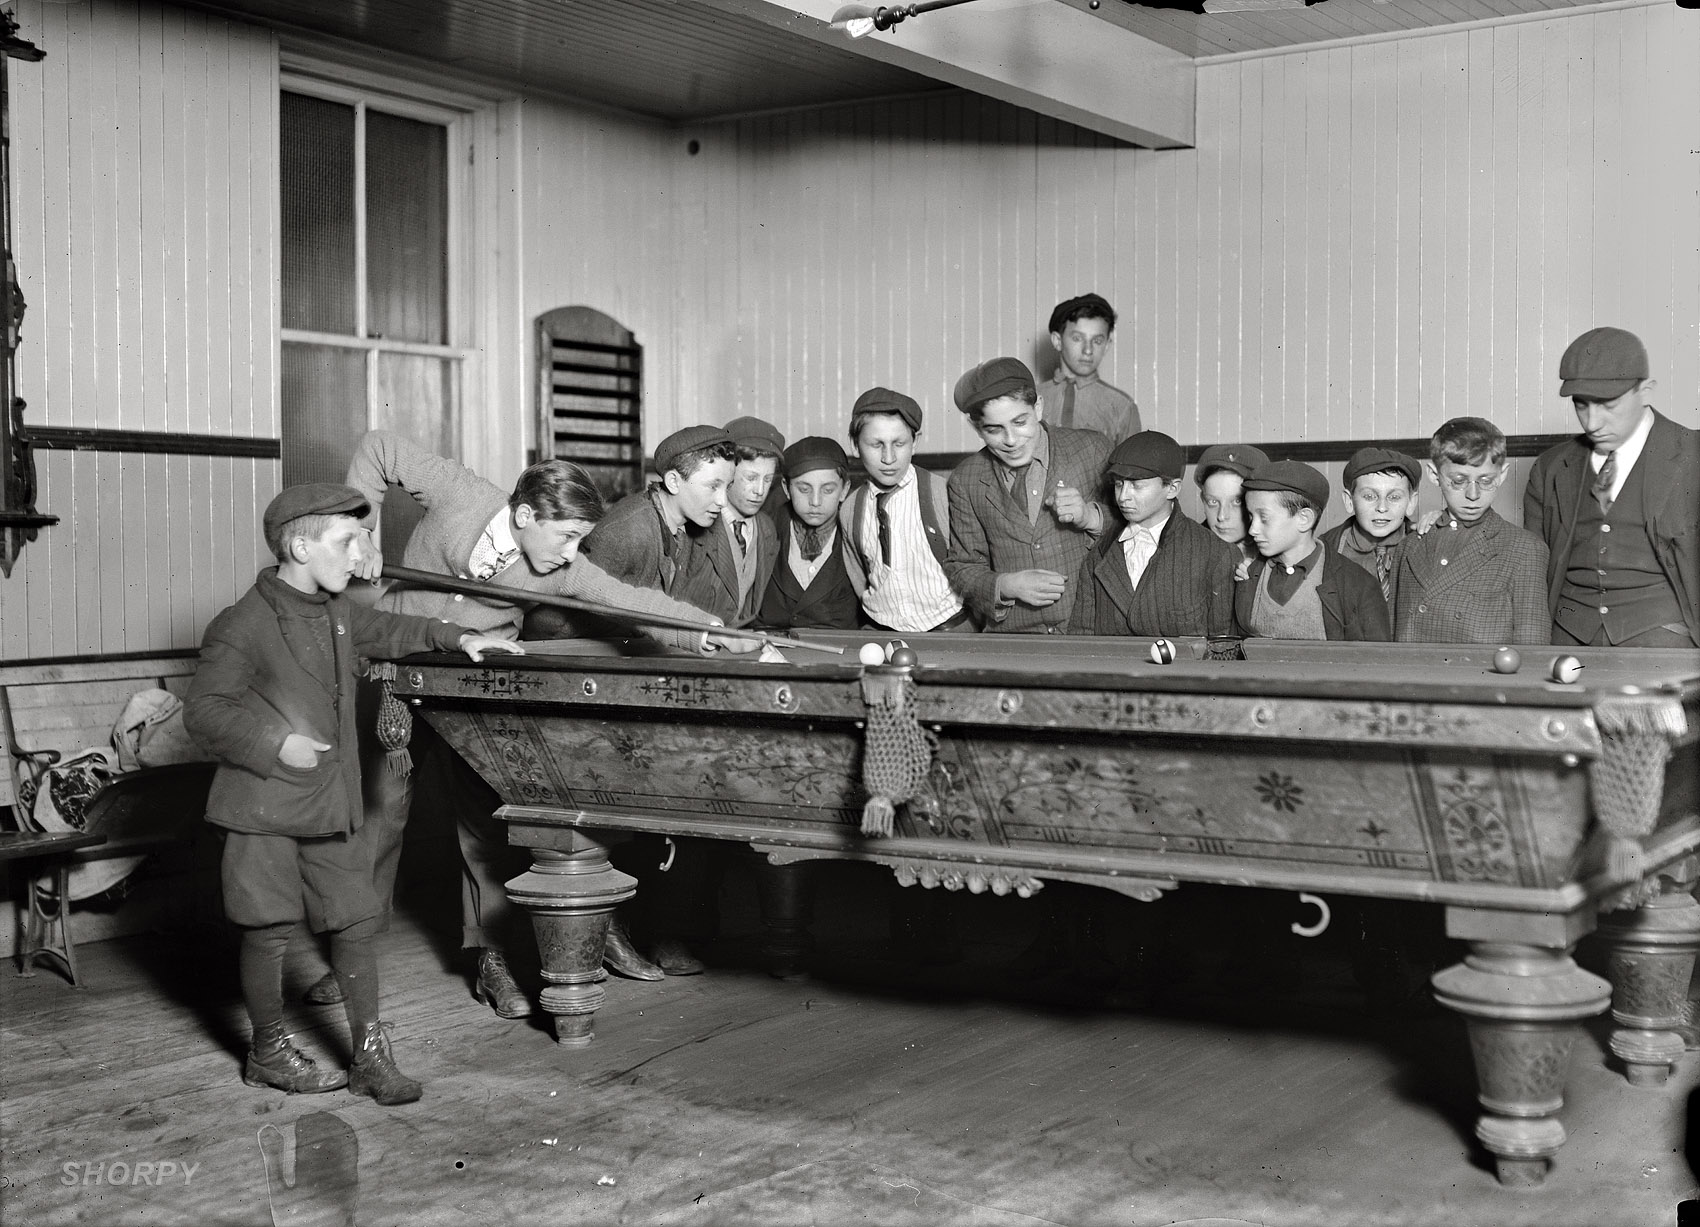 March 1909. "One way to control the street boys. A common scene in the Bancroft-Foote Boys Club, New Haven, Connecticut." View full size. Photograph and caption by Lewis Wickes Hine.